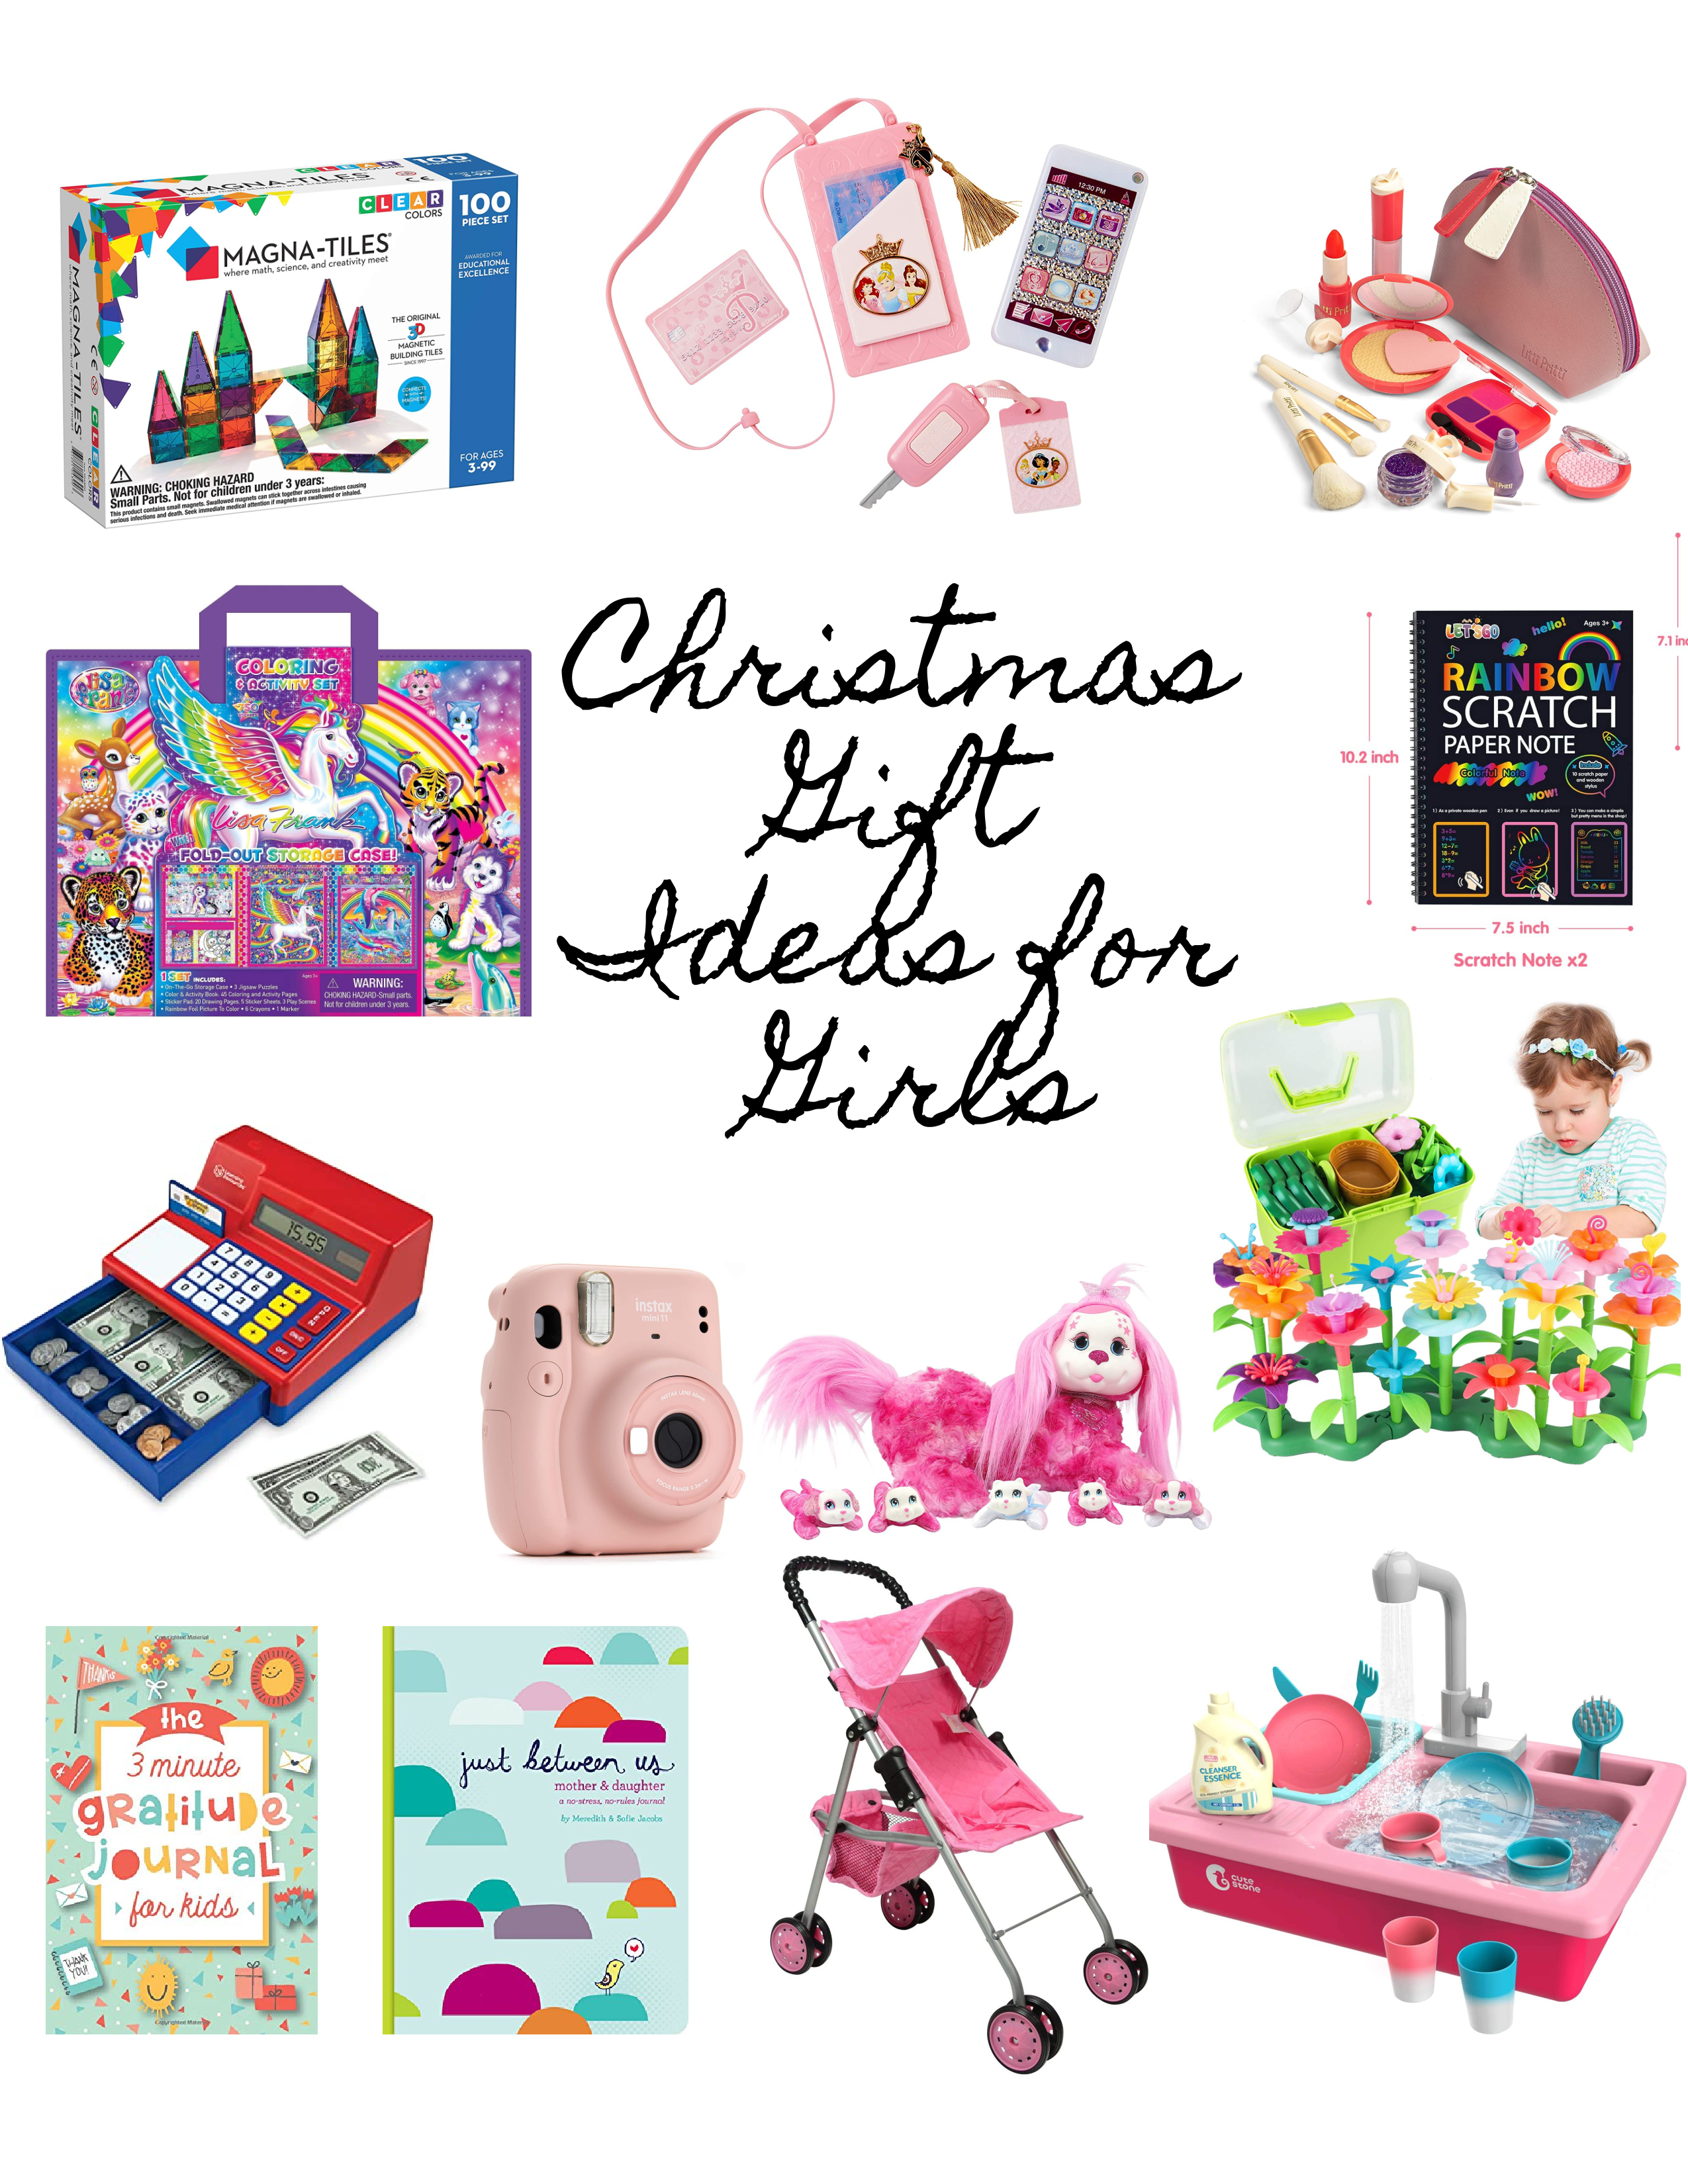 Christmas Gift Ideas for Girls! - Berry Berry Quite Contrary